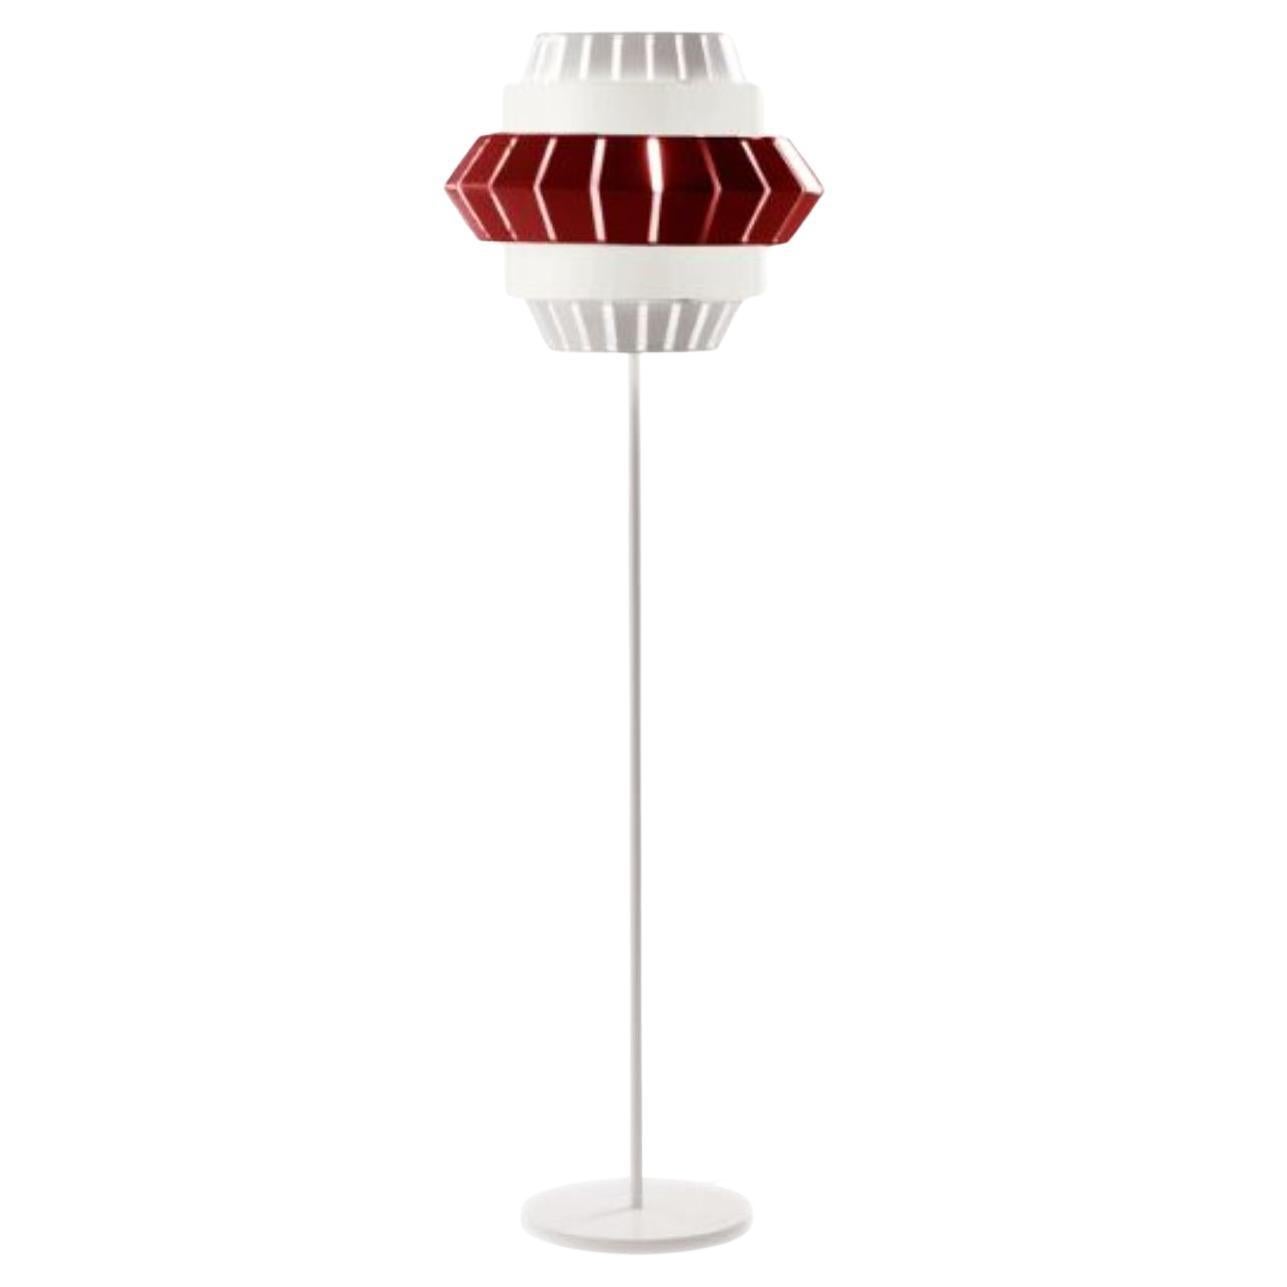 Ivory and Lipstick Comb Floor Lamp by Dooq For Sale